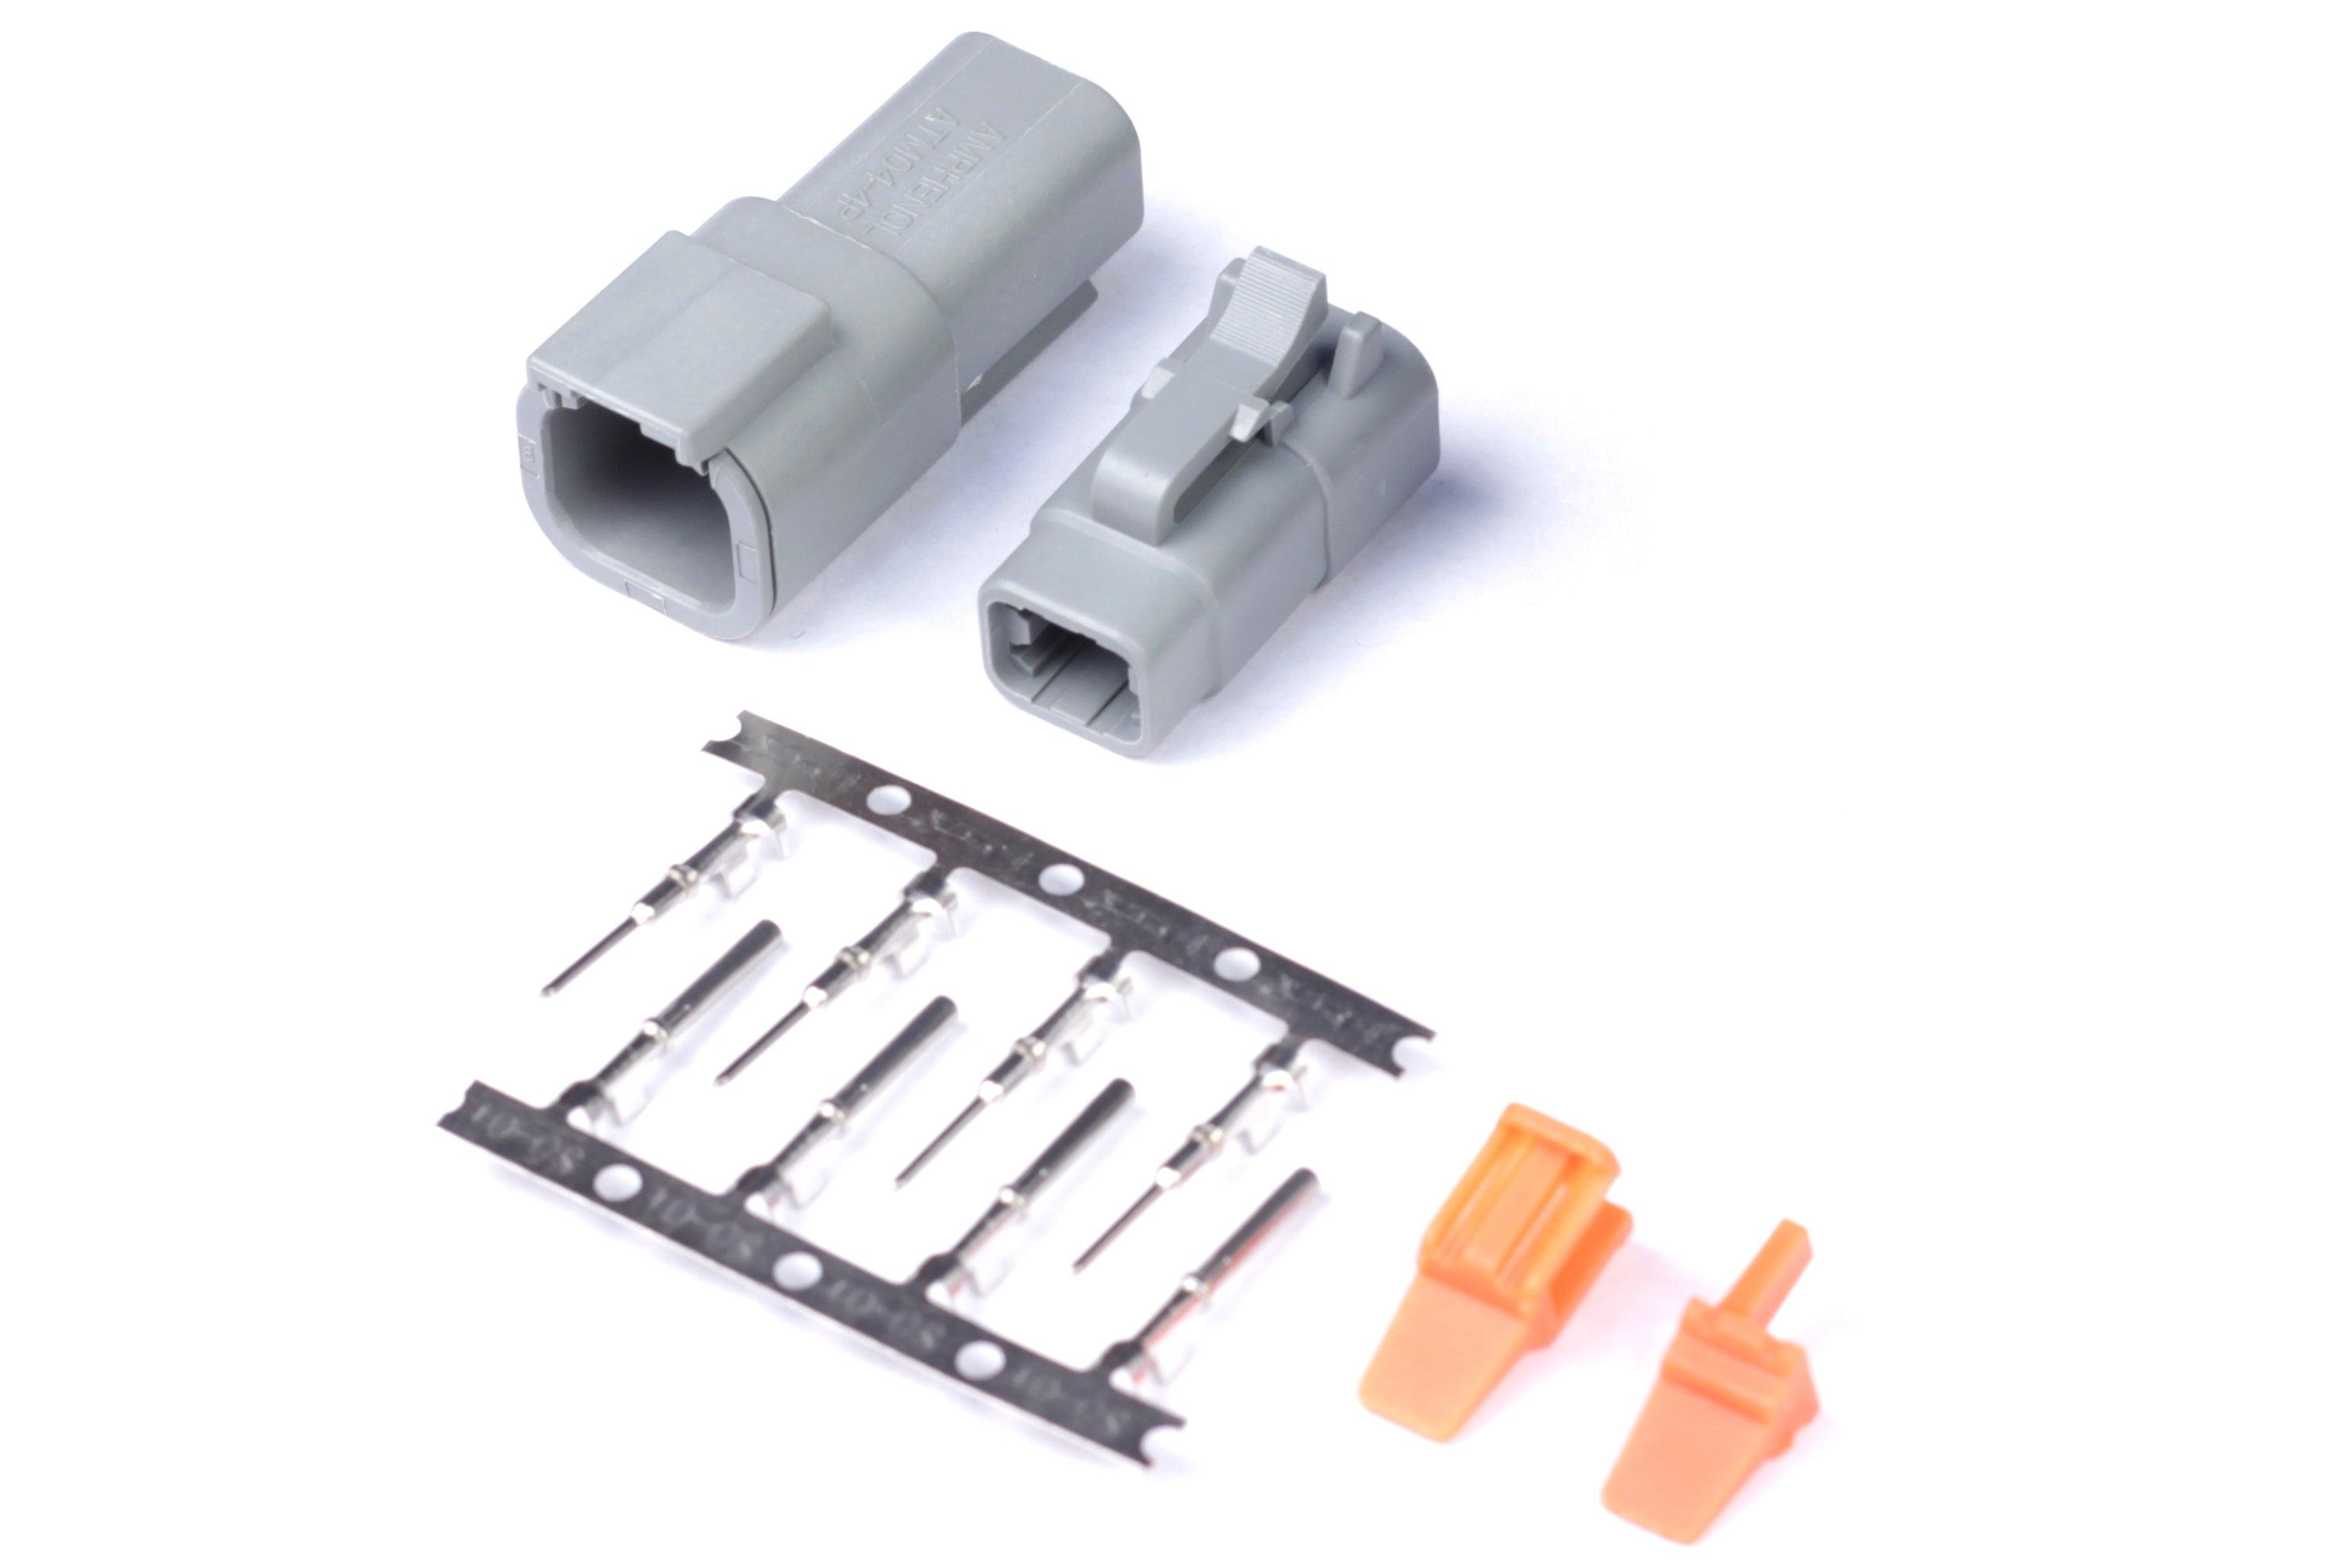 HT-031014 - Plug and Pins Only - Matching Set of Deutsch DTM-4Connectors (7.5 Amp)